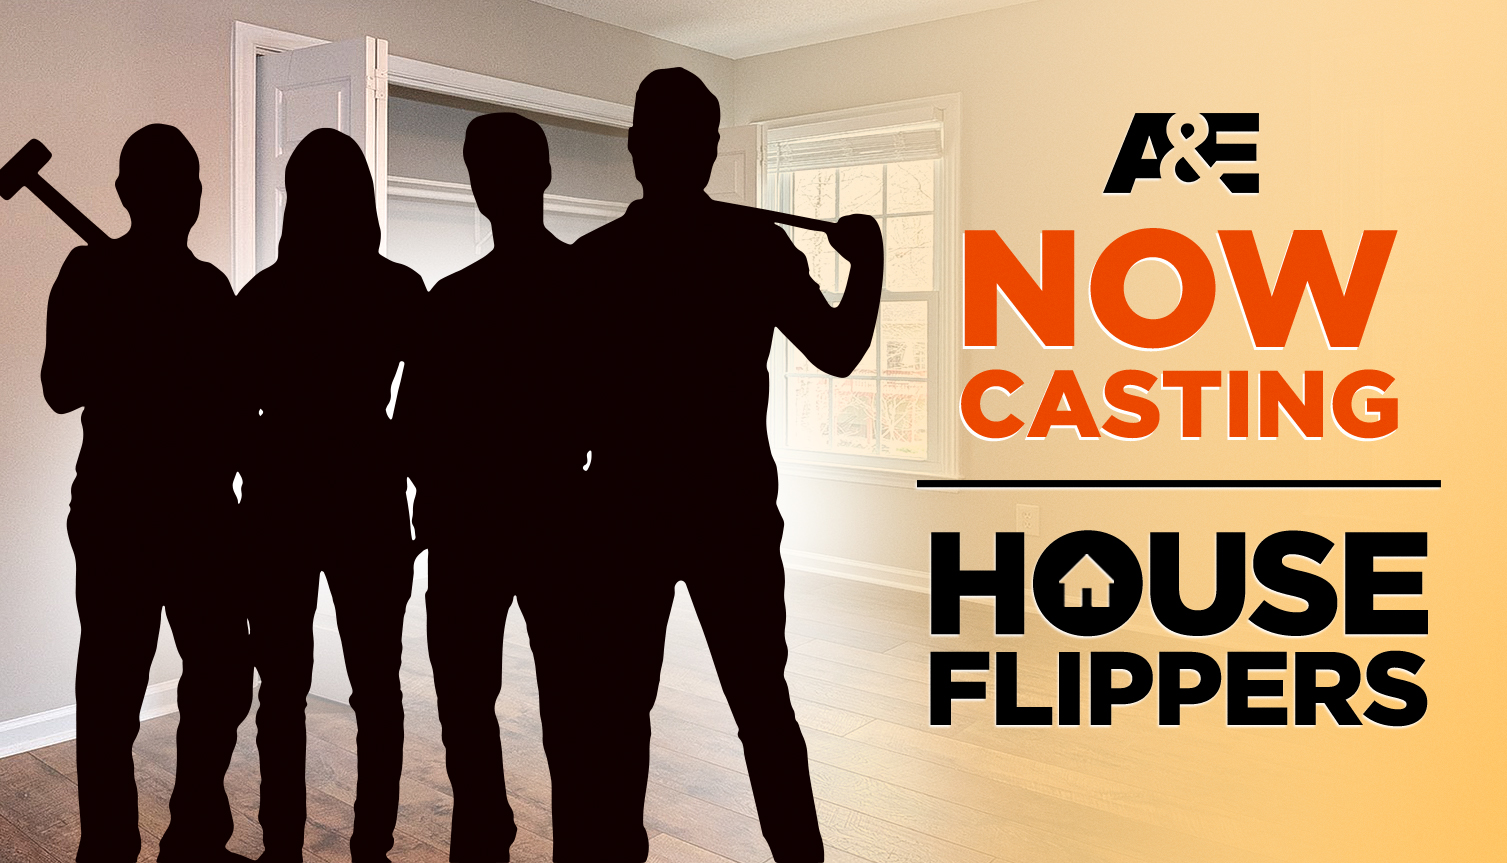 A&E Network Now Seeking House Flippers to Star in Their Own TV Series